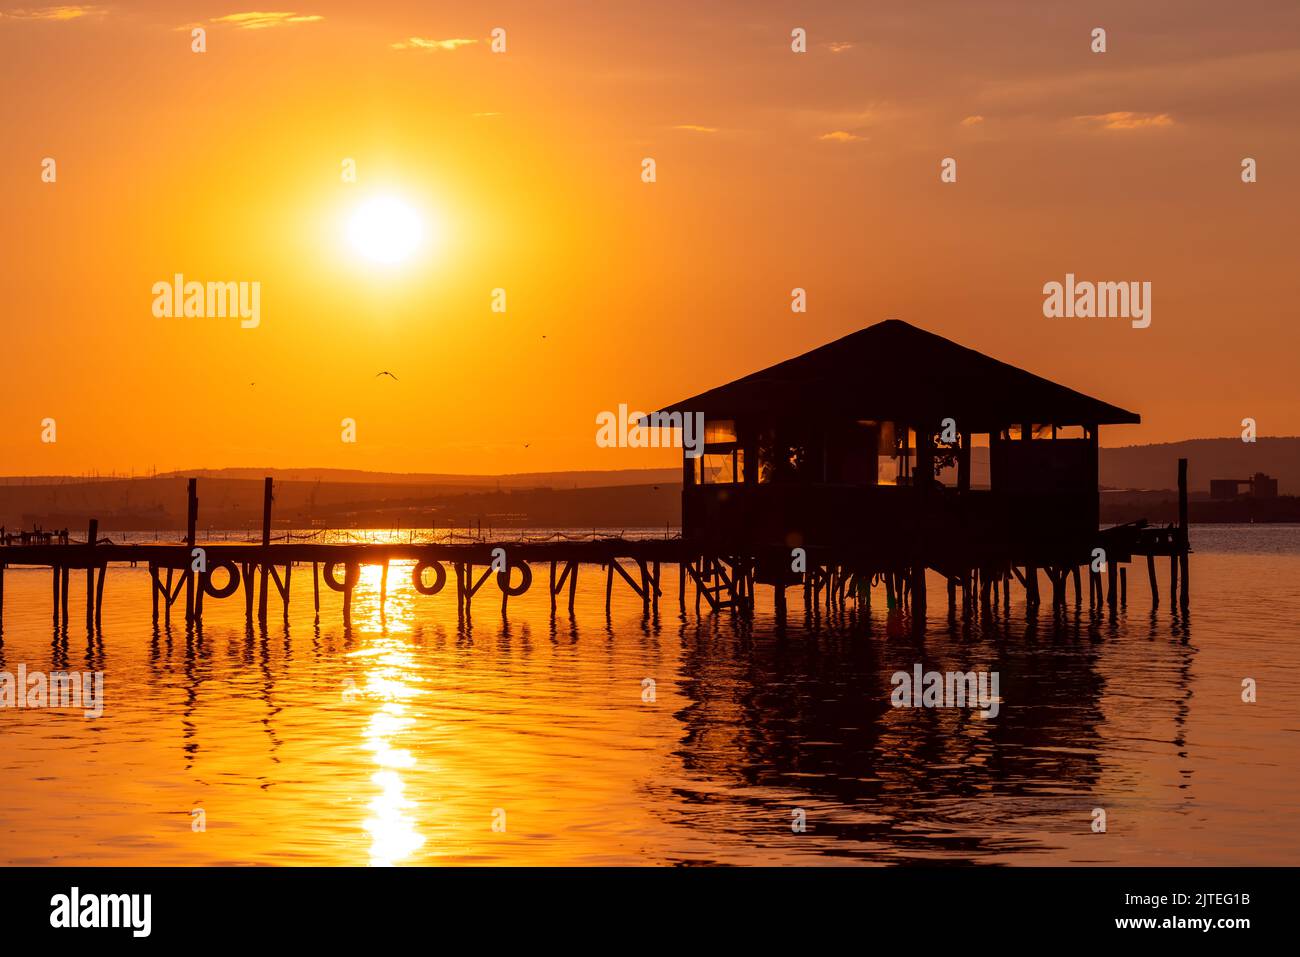 Sunset over the sea lake and old wooden pier, romantic travel destination, nature landscape Stock Photo